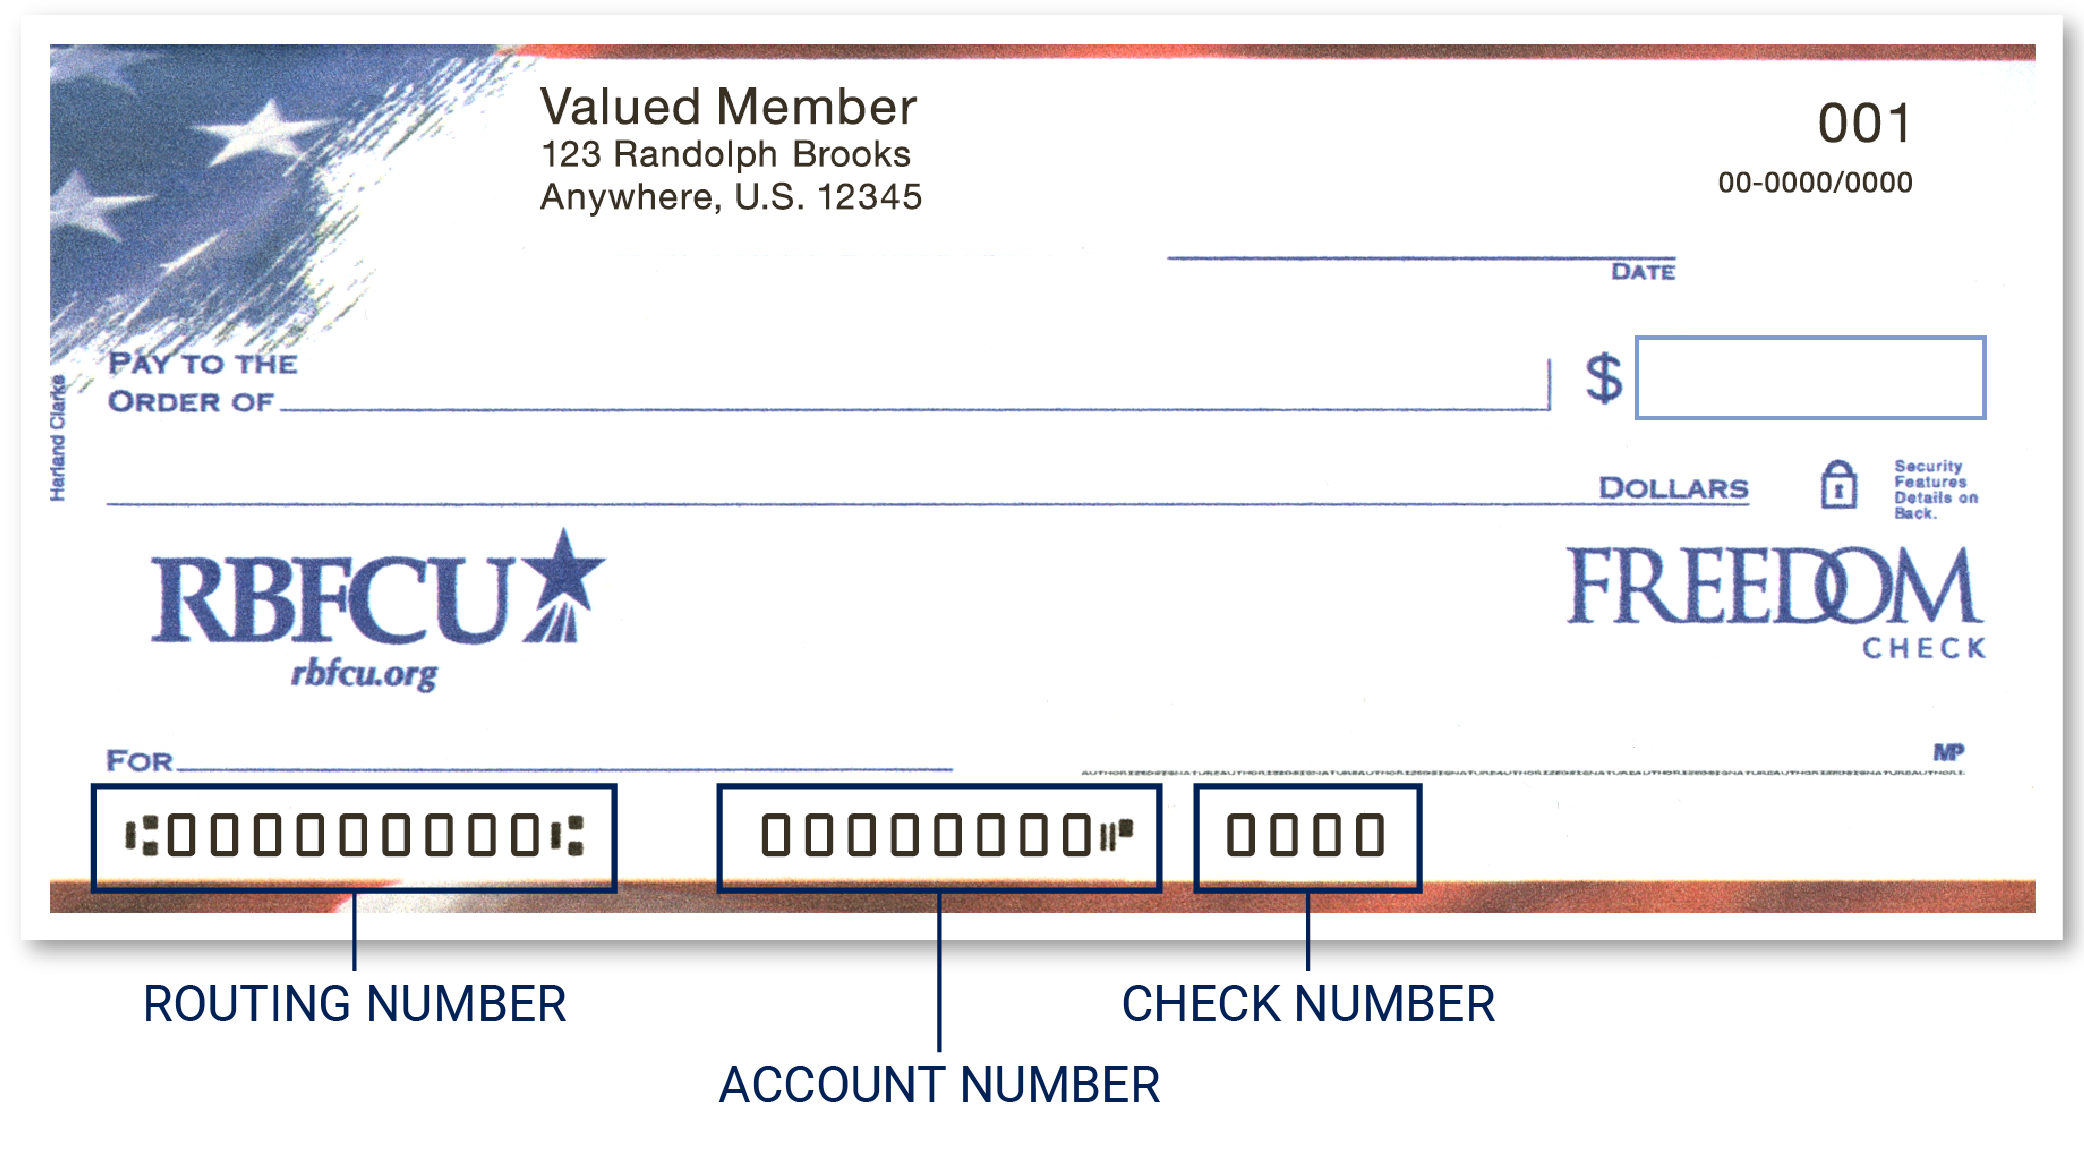 RBFCU check identify location of routing number, account number and check number